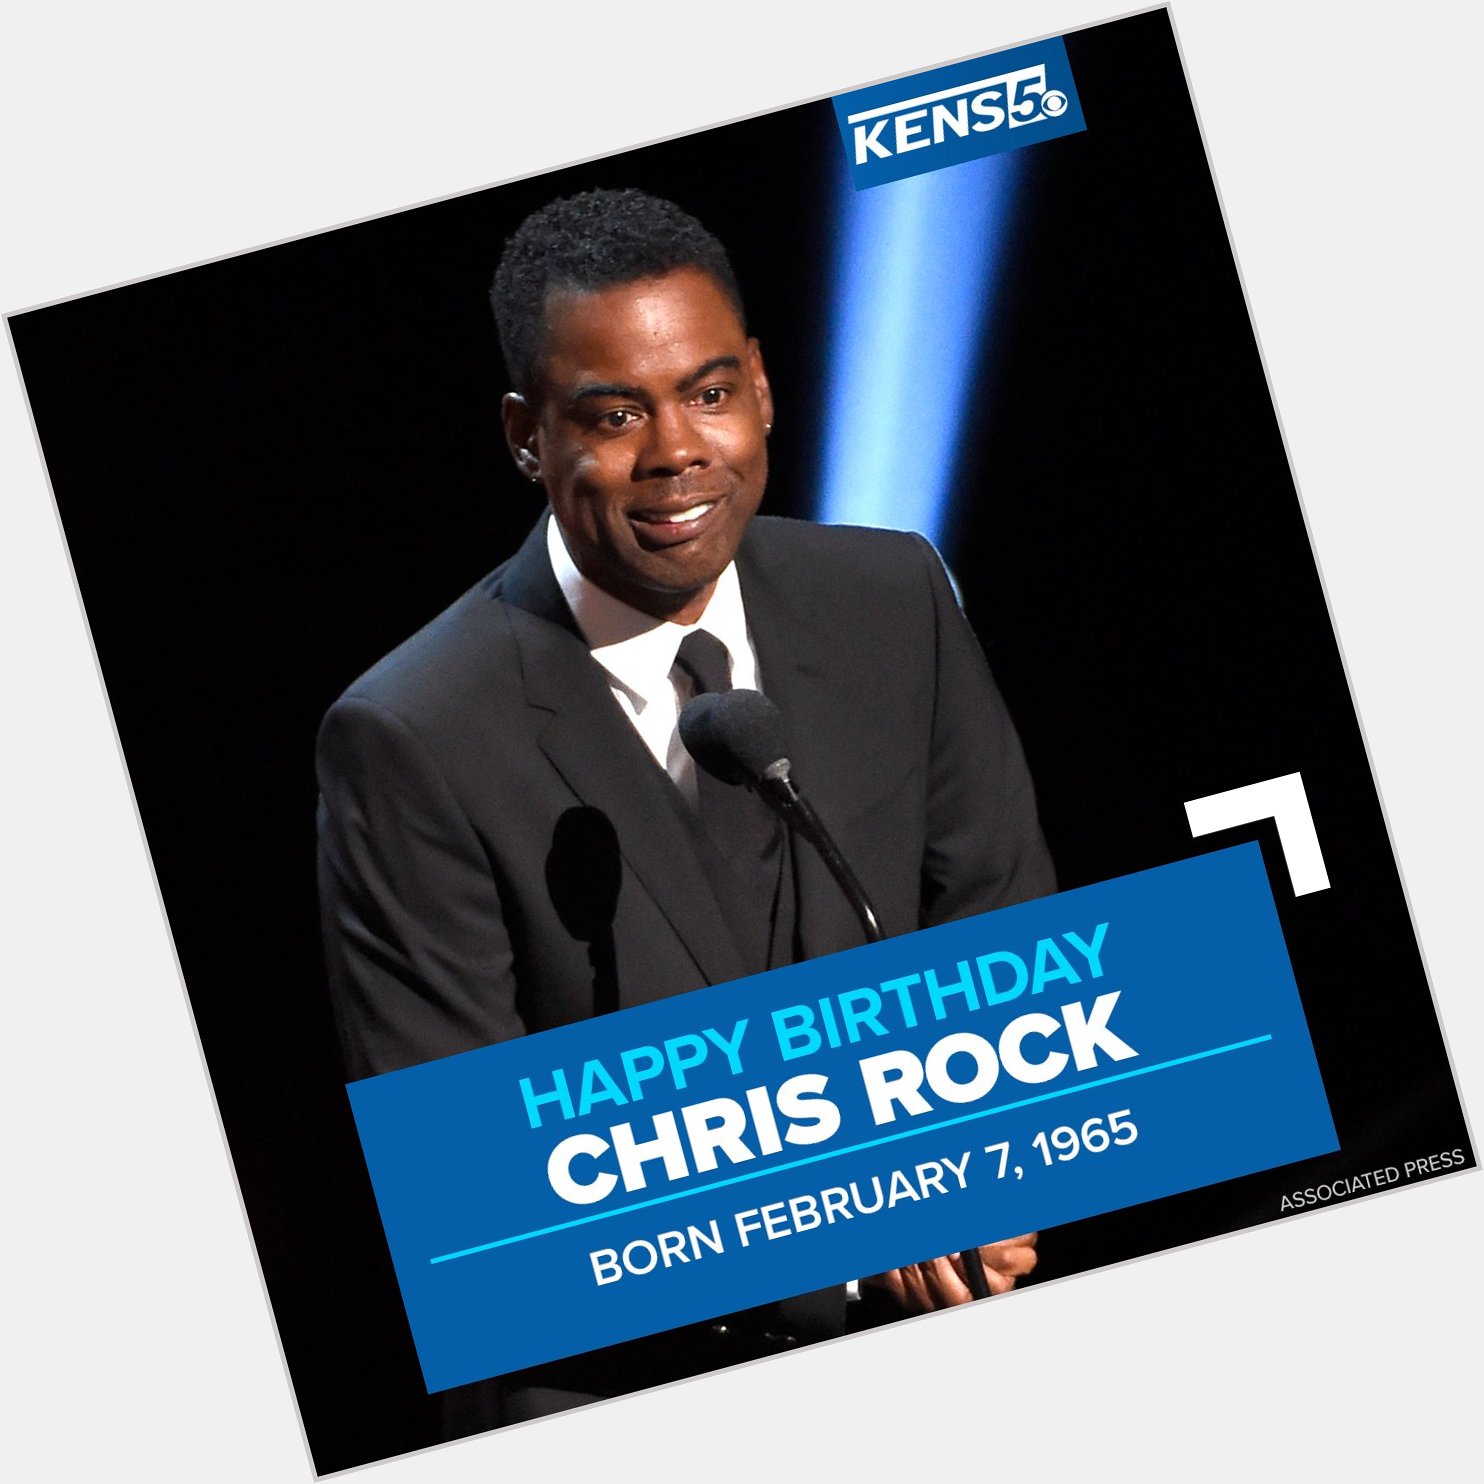 Join us in wishing funnyman Chris Rock a very HAPPY BIRTHDAY.  